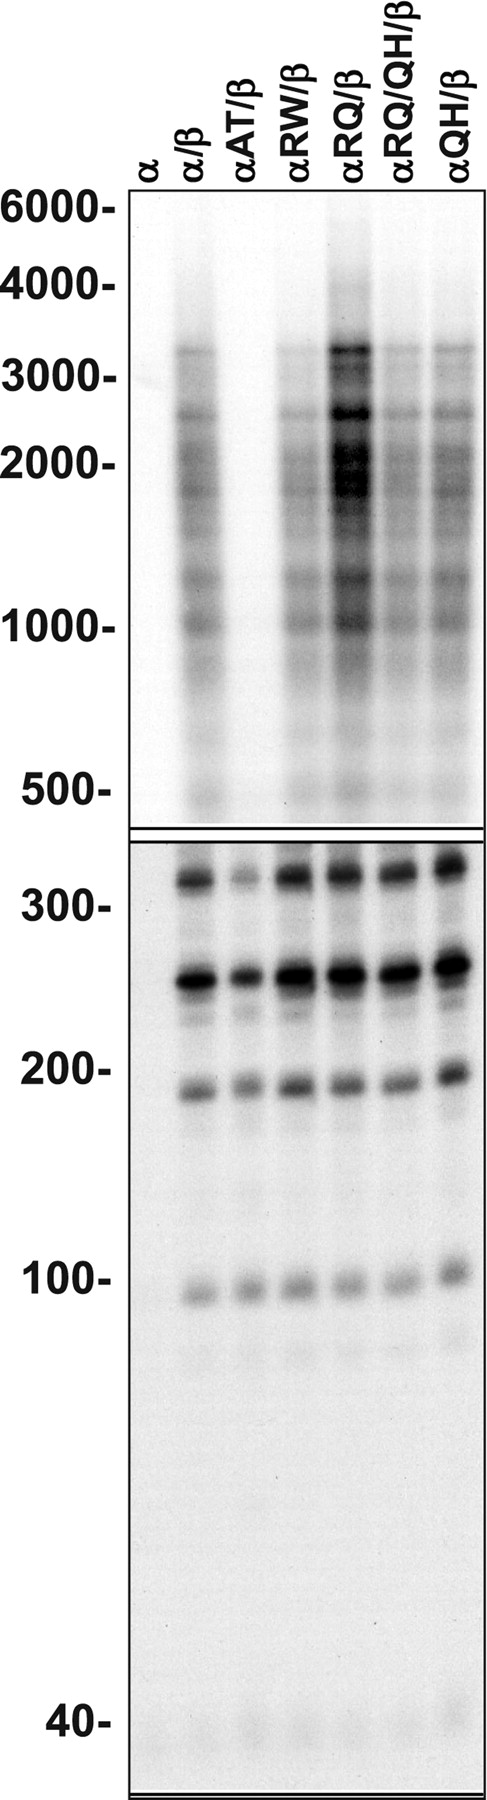 Figure 9. Processivity of reconstituted mutant POLG. Human POLG was reconstituted using a 3-fold molar excess of the accessory POLGβ-subunit over POLGα, and DNA synthesis was measured at 100 mm KCl on singly primed M13 DNA. DNA product strands were isolated, denatured and electrophoresed in denaturing 1.5% agarose (upper panel) and 6% polyacrylamide (lower panel) gels, and the gels were exposed to a phosphor screen. The presence of the accessory POLGβ subunit—also called the processivity factor of POLG—enhances the processivity of the enzyme considerably, and the fragment lengths are, therefore, considerably longer than those with POLGα alone. All the 22 distinct bands derived from two independent experiments were quantitated and yielded the following processivity values (expressed as average processivity units, apu): α, 42 nt; αβ, 437 nt; A467T, 145 nt; R627W, 358 nt; R627Q, 558 nt; R627W/R627Q, 416 nt; Q1236H, 444 nt. The codes for protein variants are as in Figure 6.